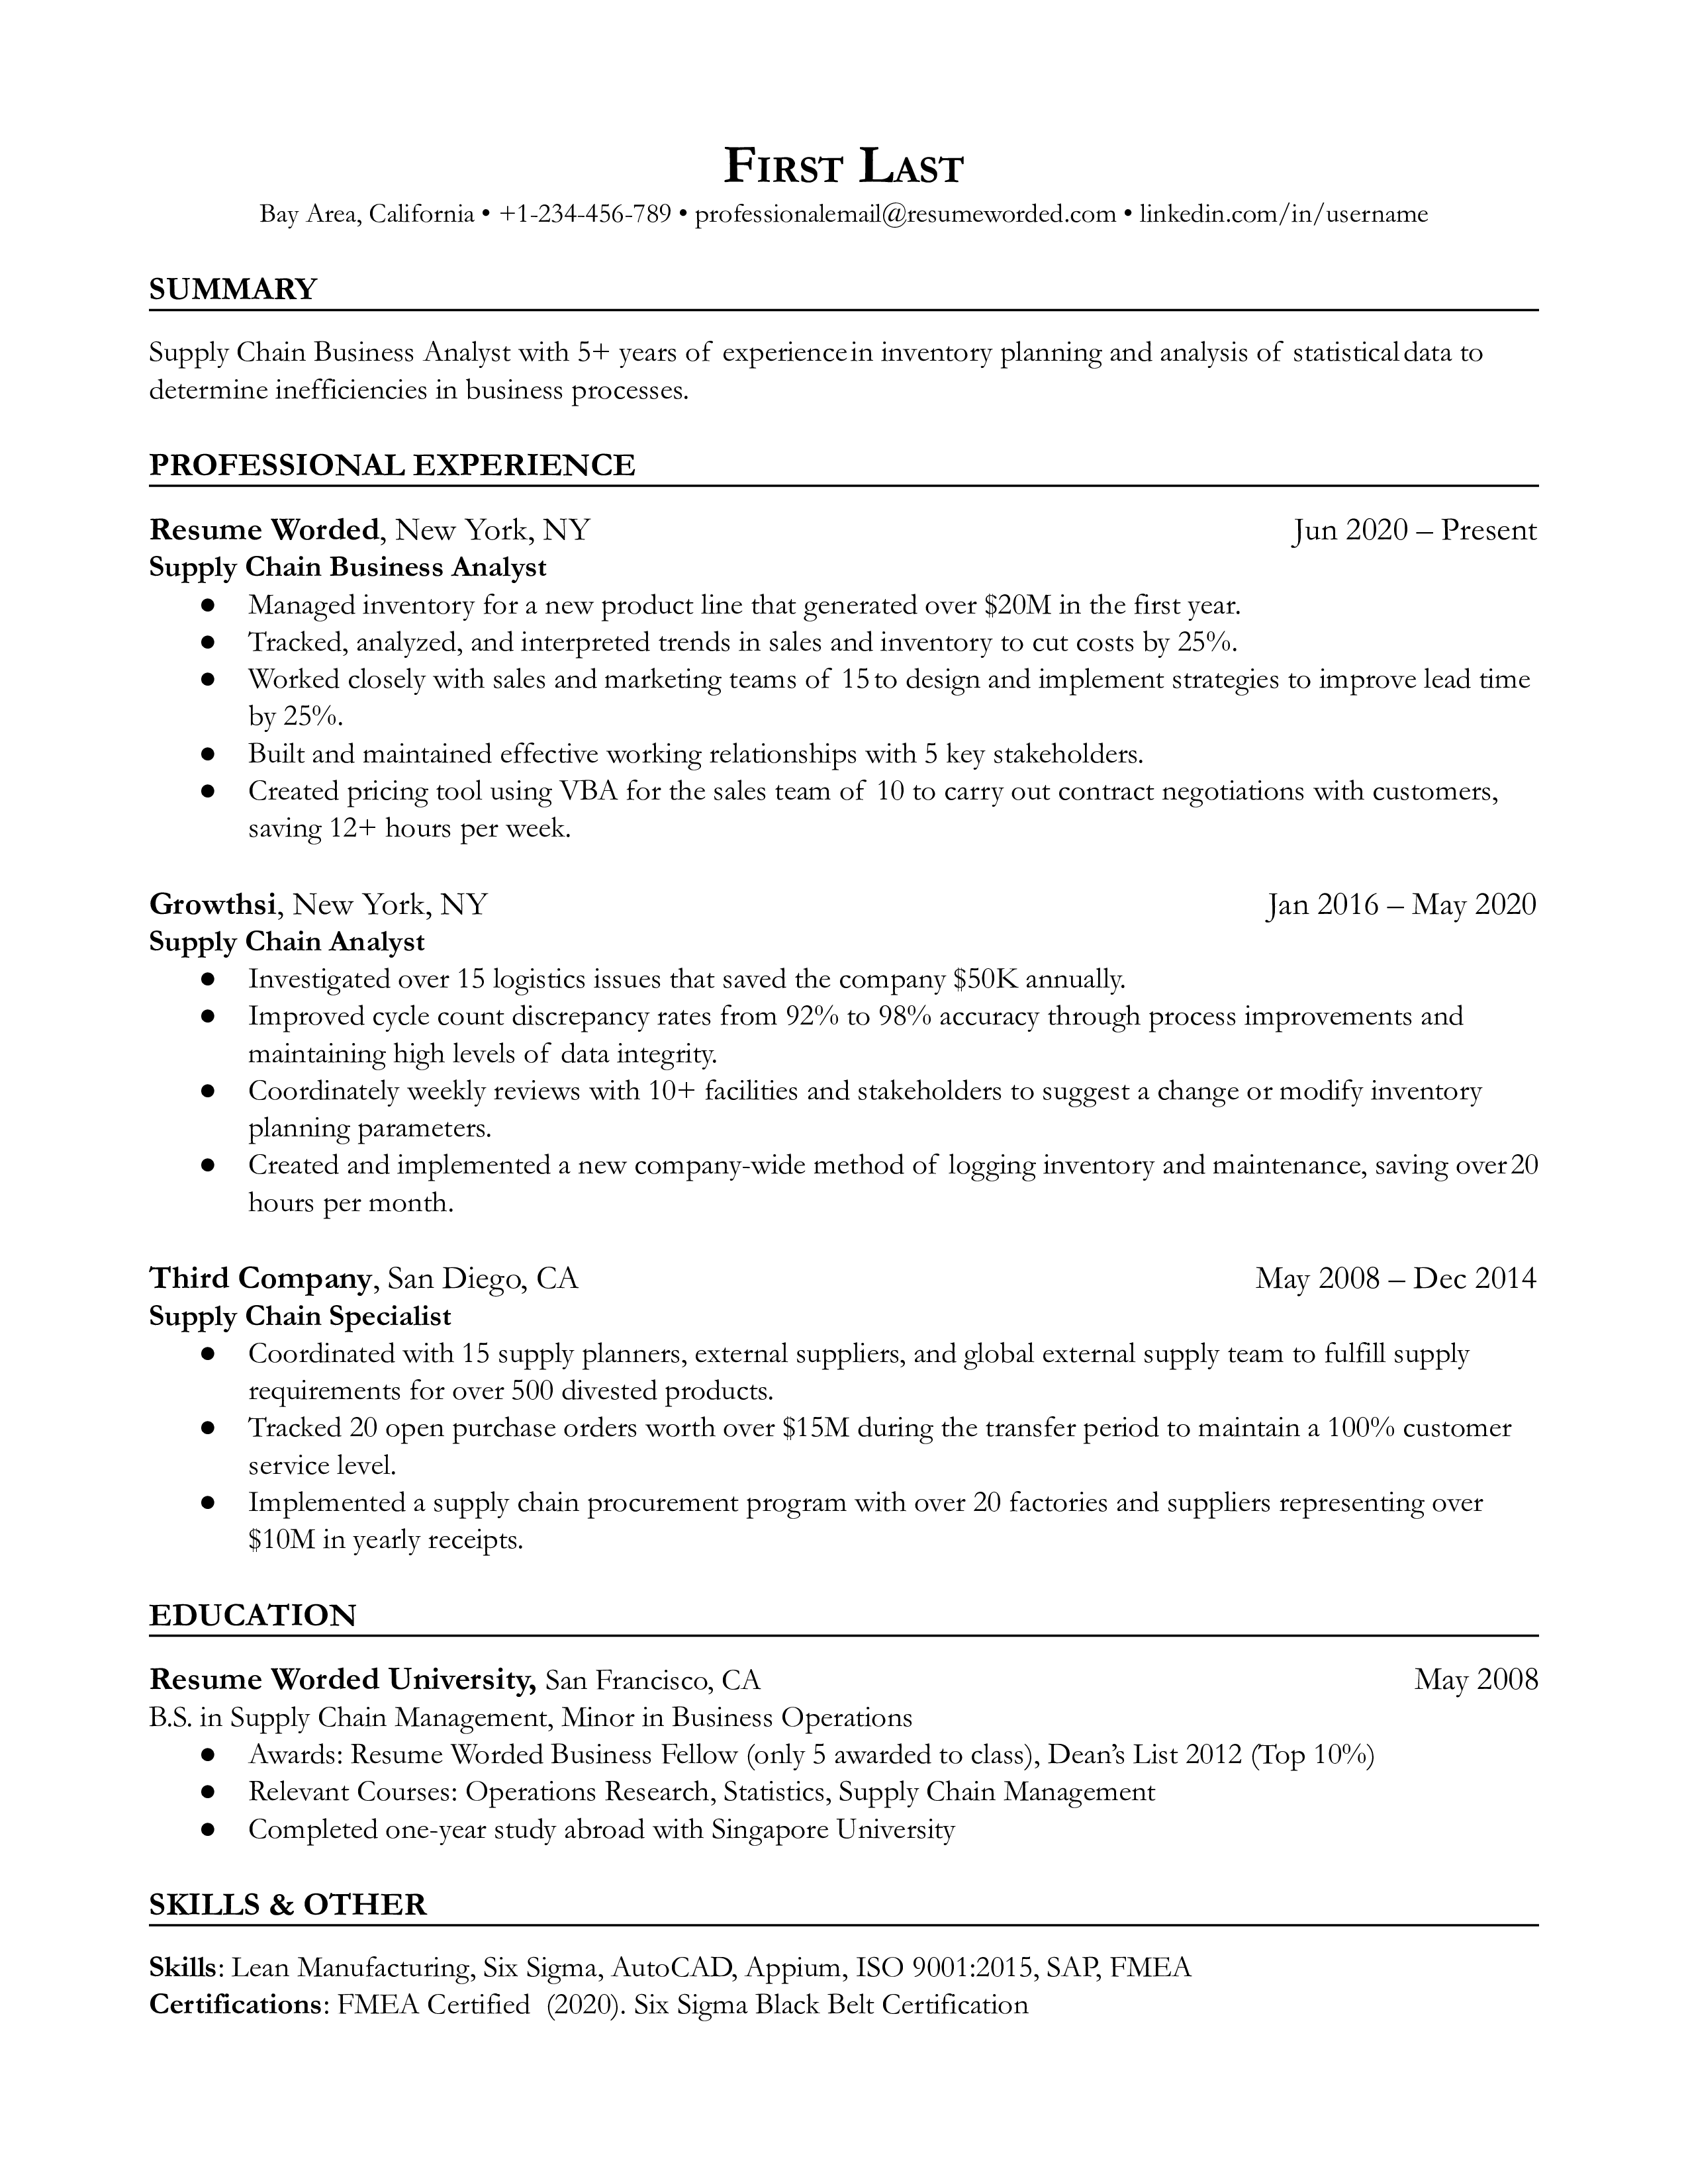 Supply Chain Business Analyst Resume Template + Example